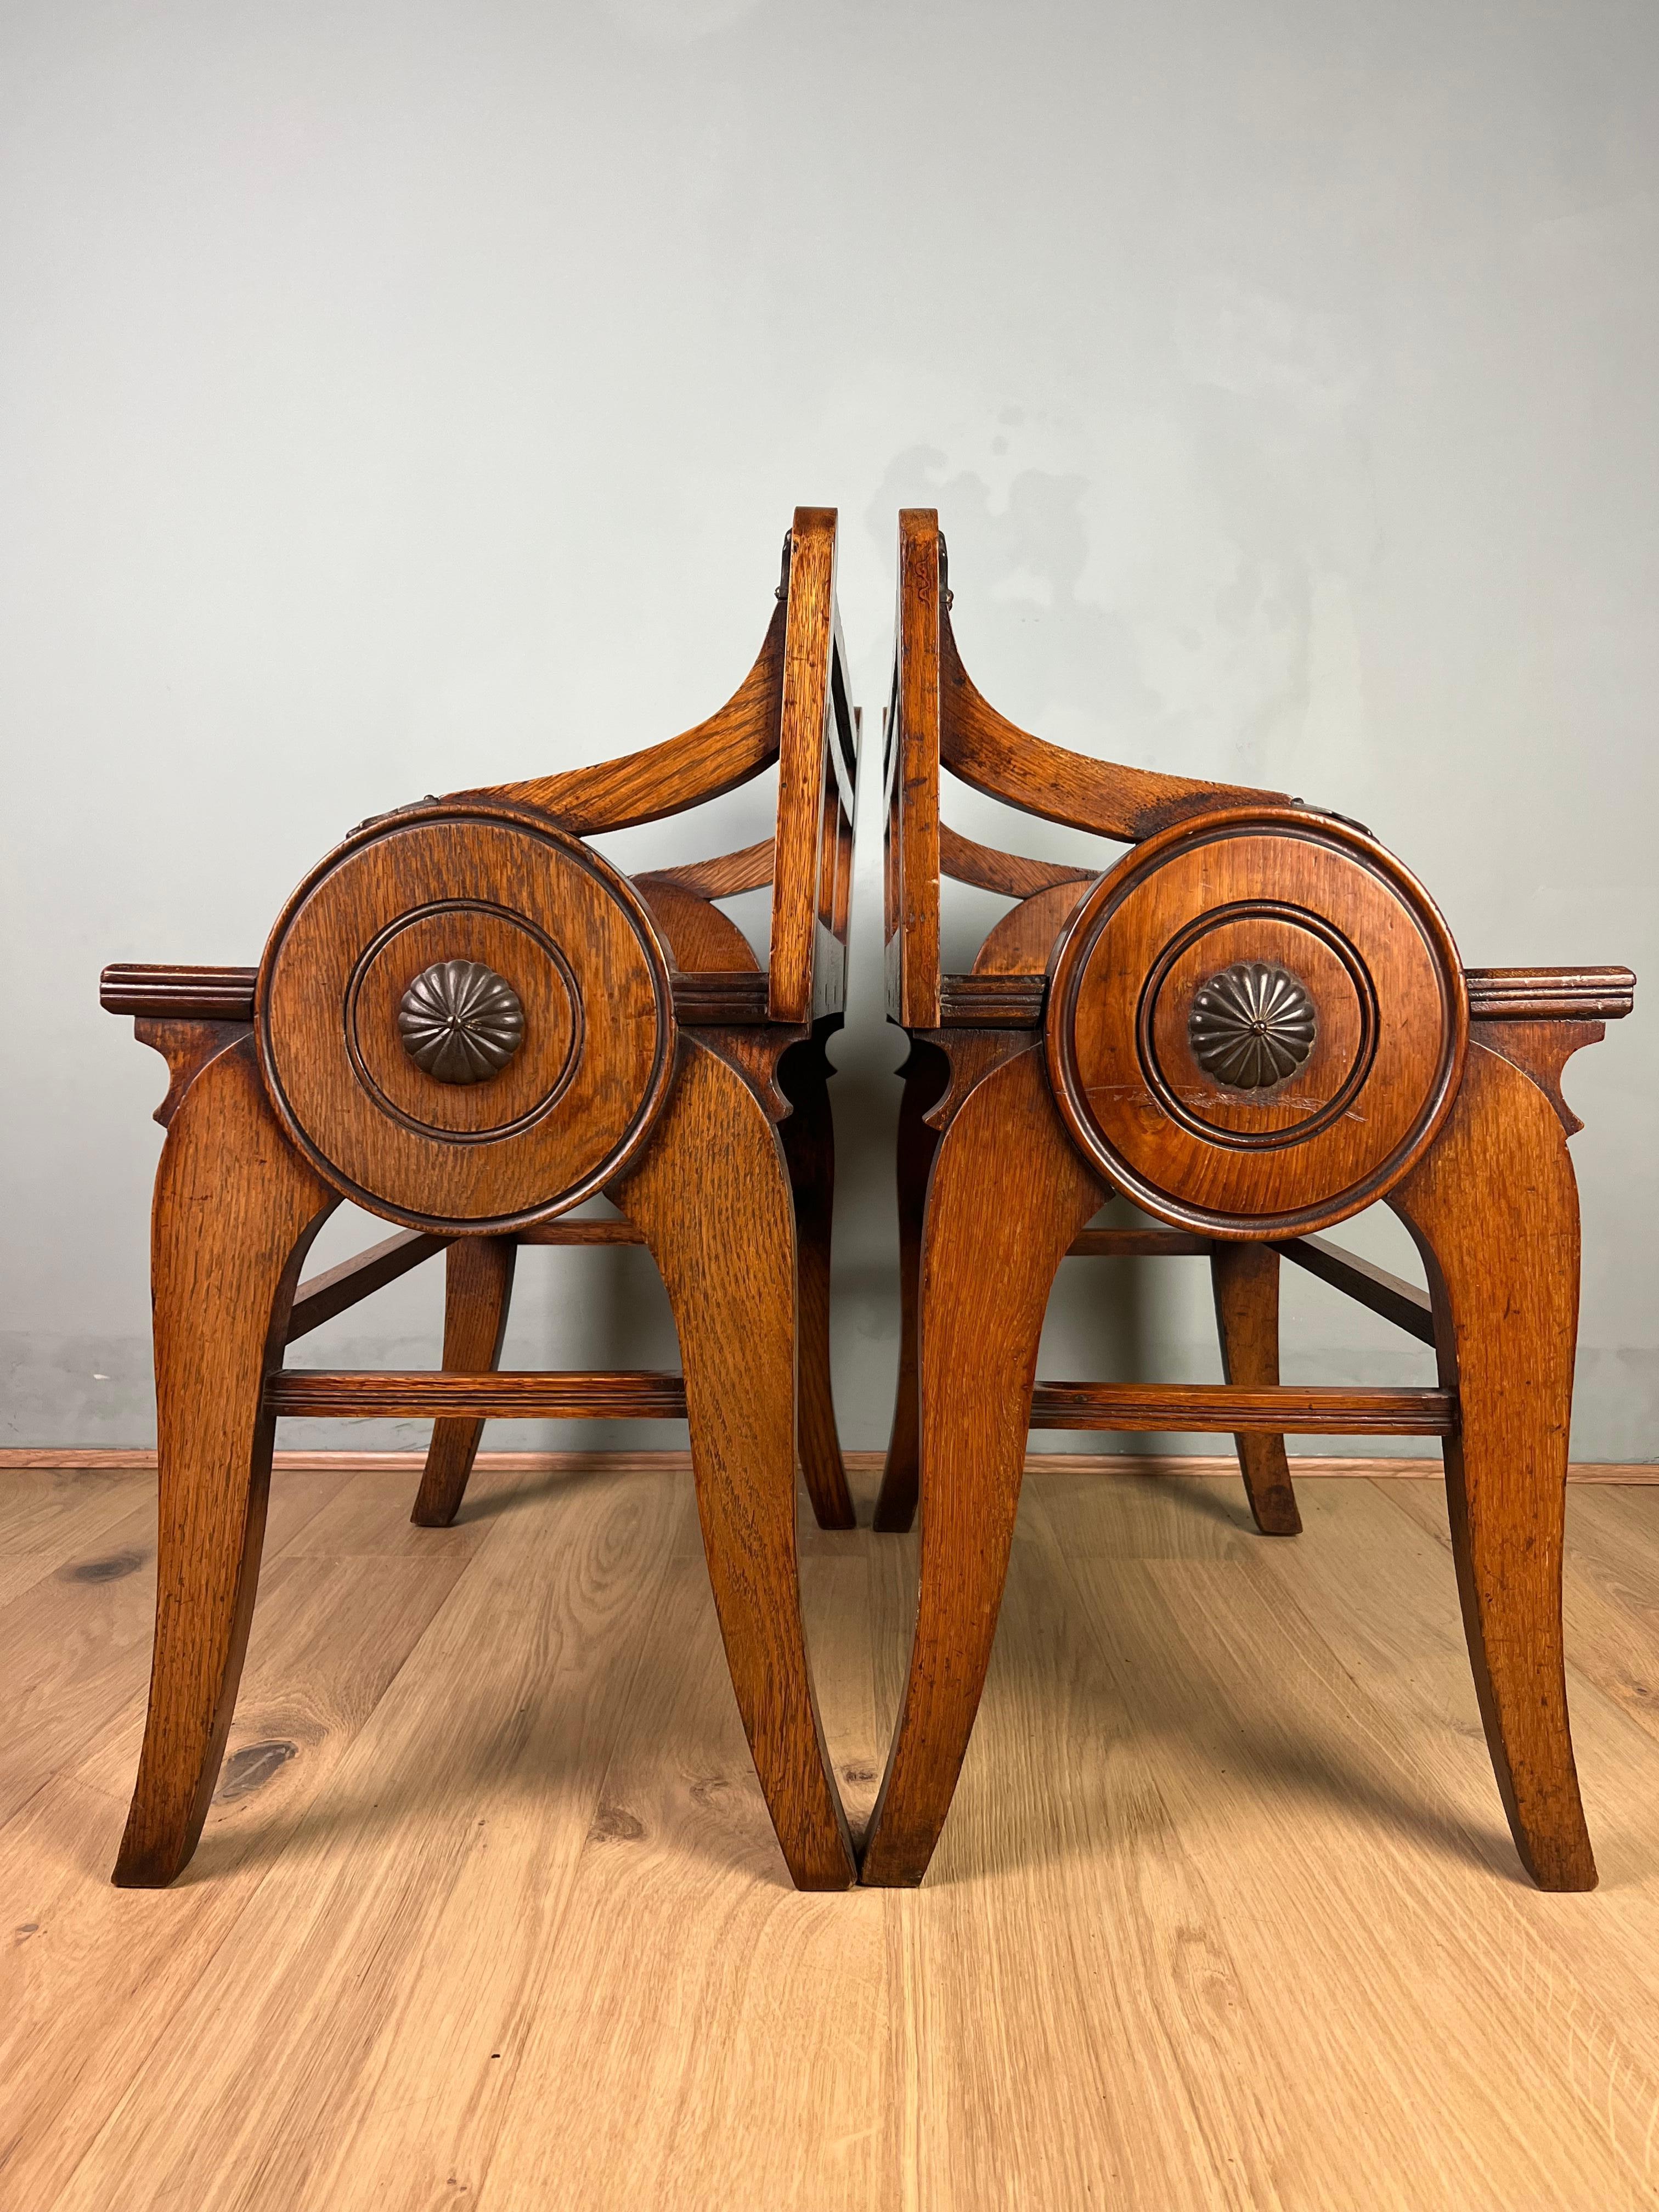 A matched pair of oak Schoolbred benches/stools in the Aesthetic style, one with the kite mark stamp to the back rail. Both benches are a pleasant light honey colour retaining its original patina. The benches have there original brass baluster back